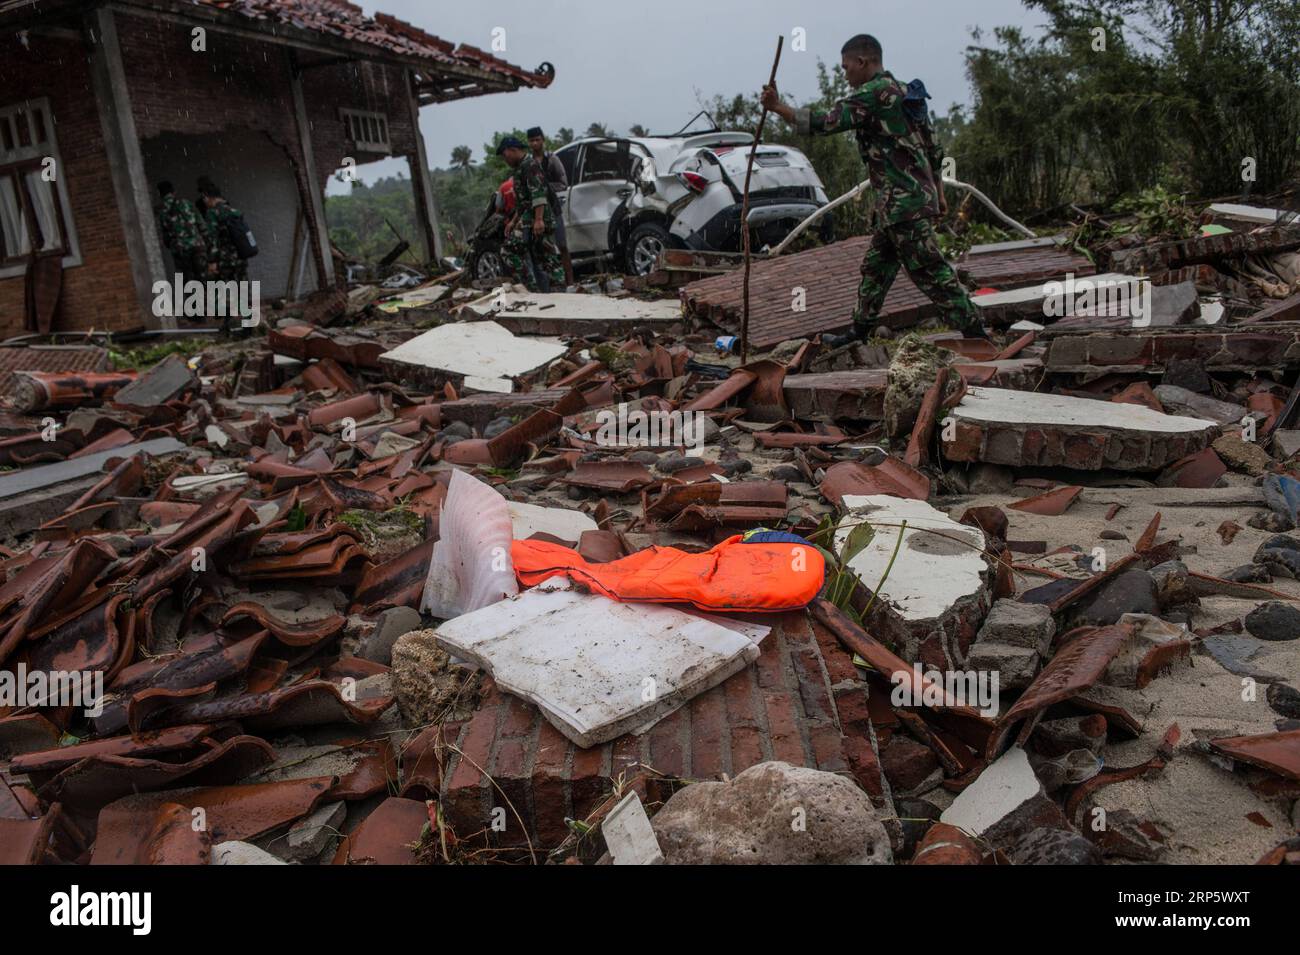 (181225) -- PANDEGLANG, Dec. 25, 2018 -- Rescuers search for tsunami victims at Tanjung Lesung district of Pandeglang, Banten Province, Indonesia, Dec. 25, 2018. Casualty from the tsunami triggered by a volcanic eruption in Sunda Strait in Indonesia climbed to 429 people on Tuesday, spokesman of national disaster management agency Sutopo Purwo Nugroho told a press conference. ) INDONESIA-PANDEGLANG-TSUNAMI-AFTERMATH VerixSanovri PUBLICATIONxNOTxINxCHN Stock Photo